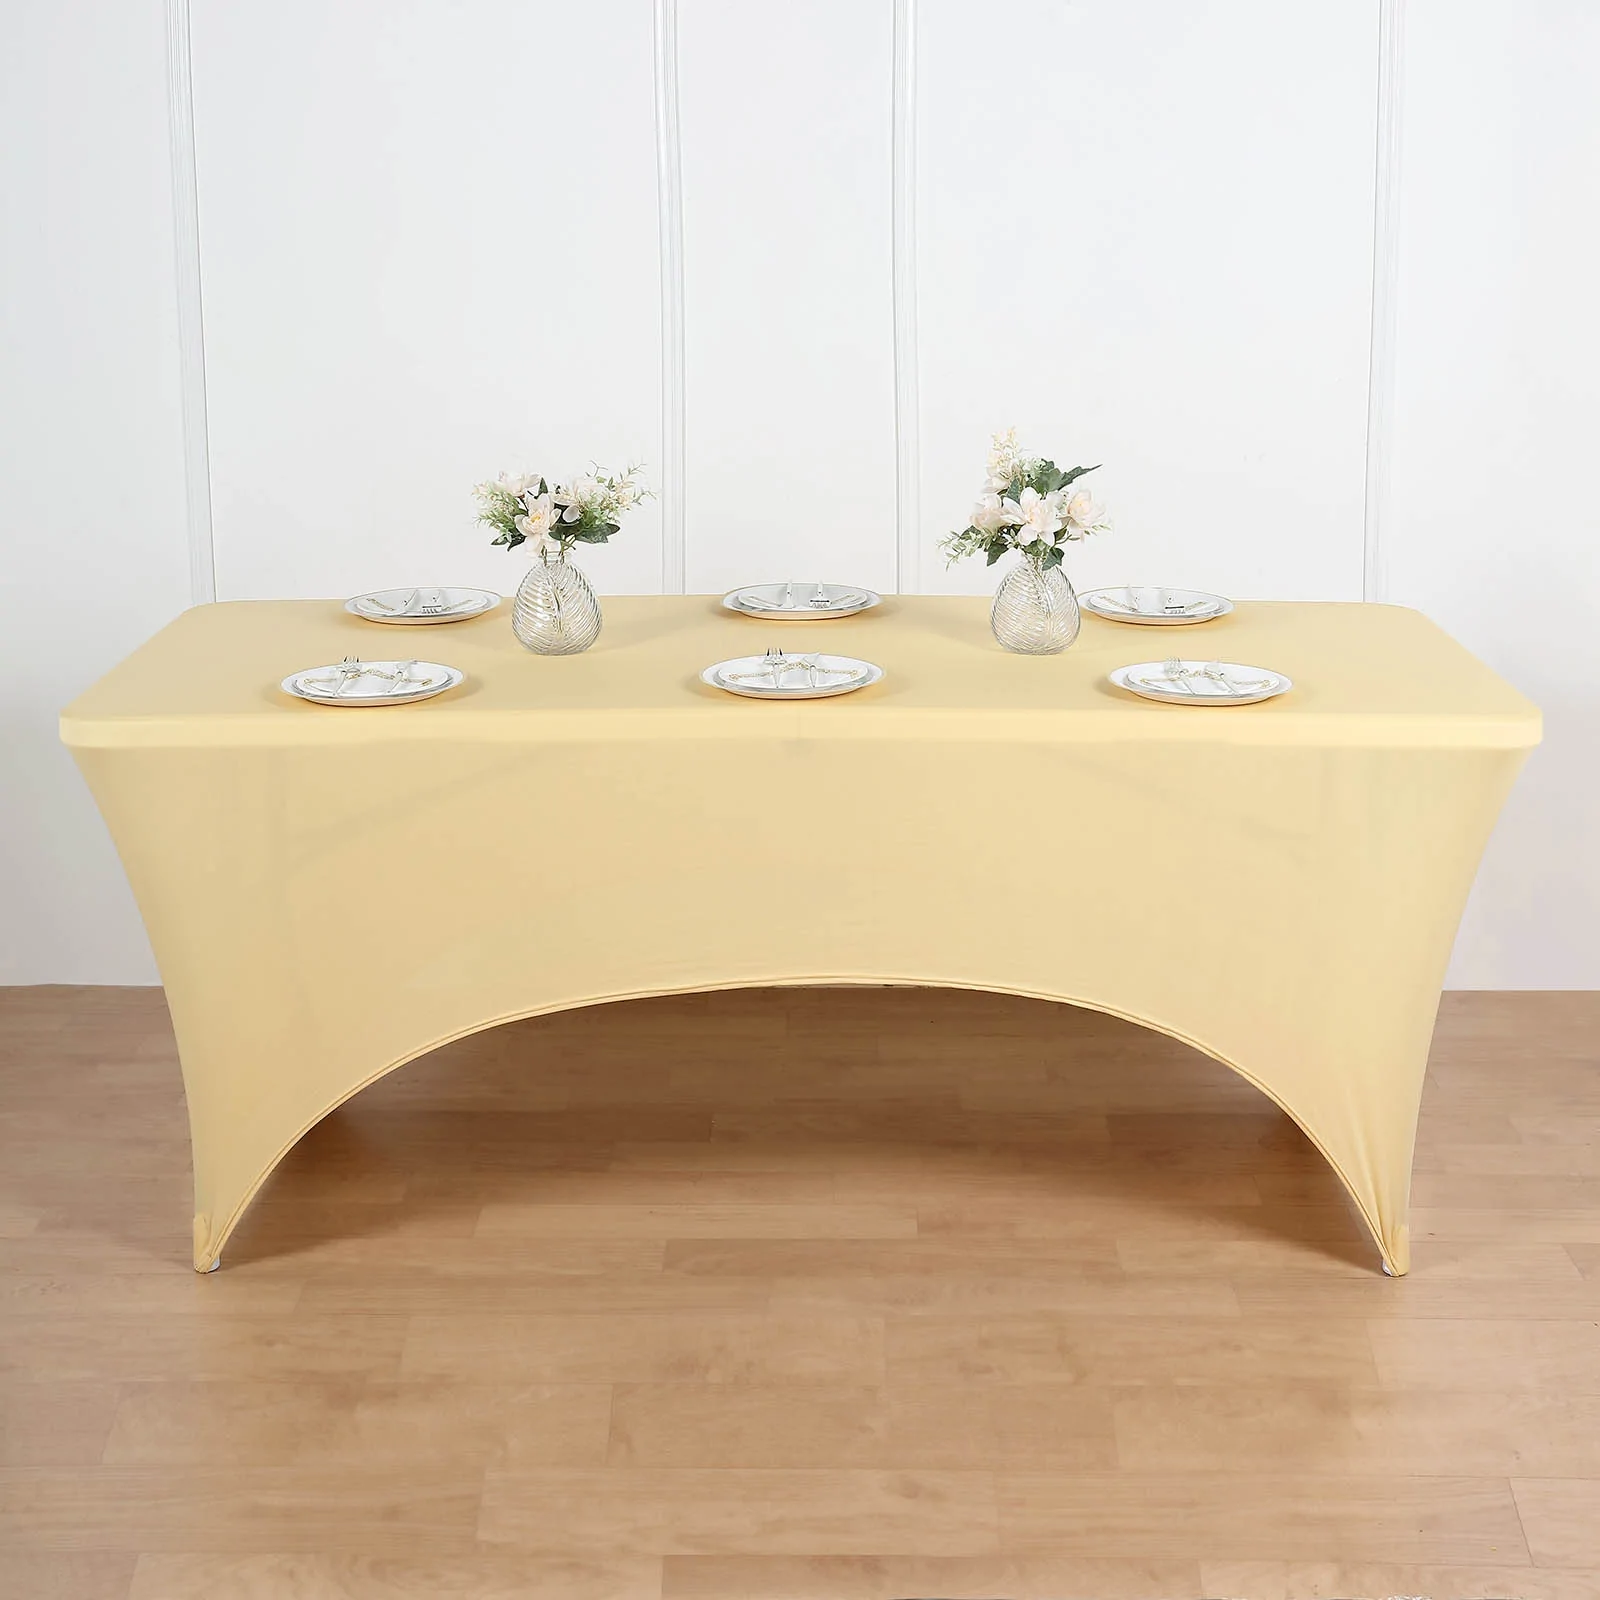 Champagne - 6 Ft Rectangular Spandex Table Cover Wedding Party - $49.06